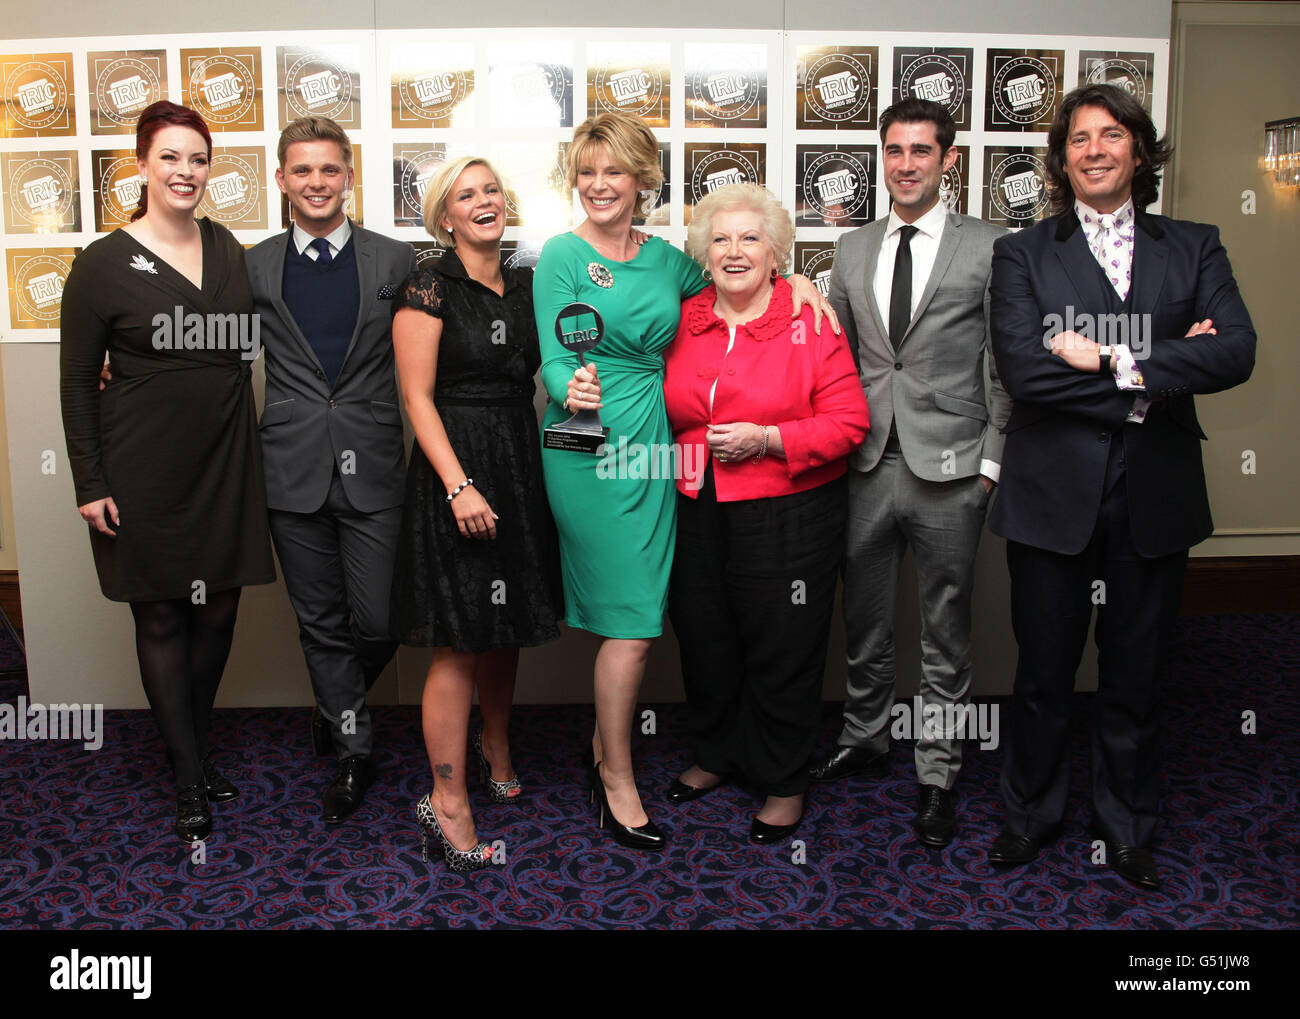 Kerry Katona (3rd left) and the members of This Morning Sharon Marshall, Jeffrey Brazier, Denise Robertson, Matt Johnson and Laurence Llewelyn-Bowen, with their Daytime TV Programme award during the Television and Radio Industries Club (TRIC) Awards, at Grosvenor House Hotel on Park Lane, central London. Stock Photo